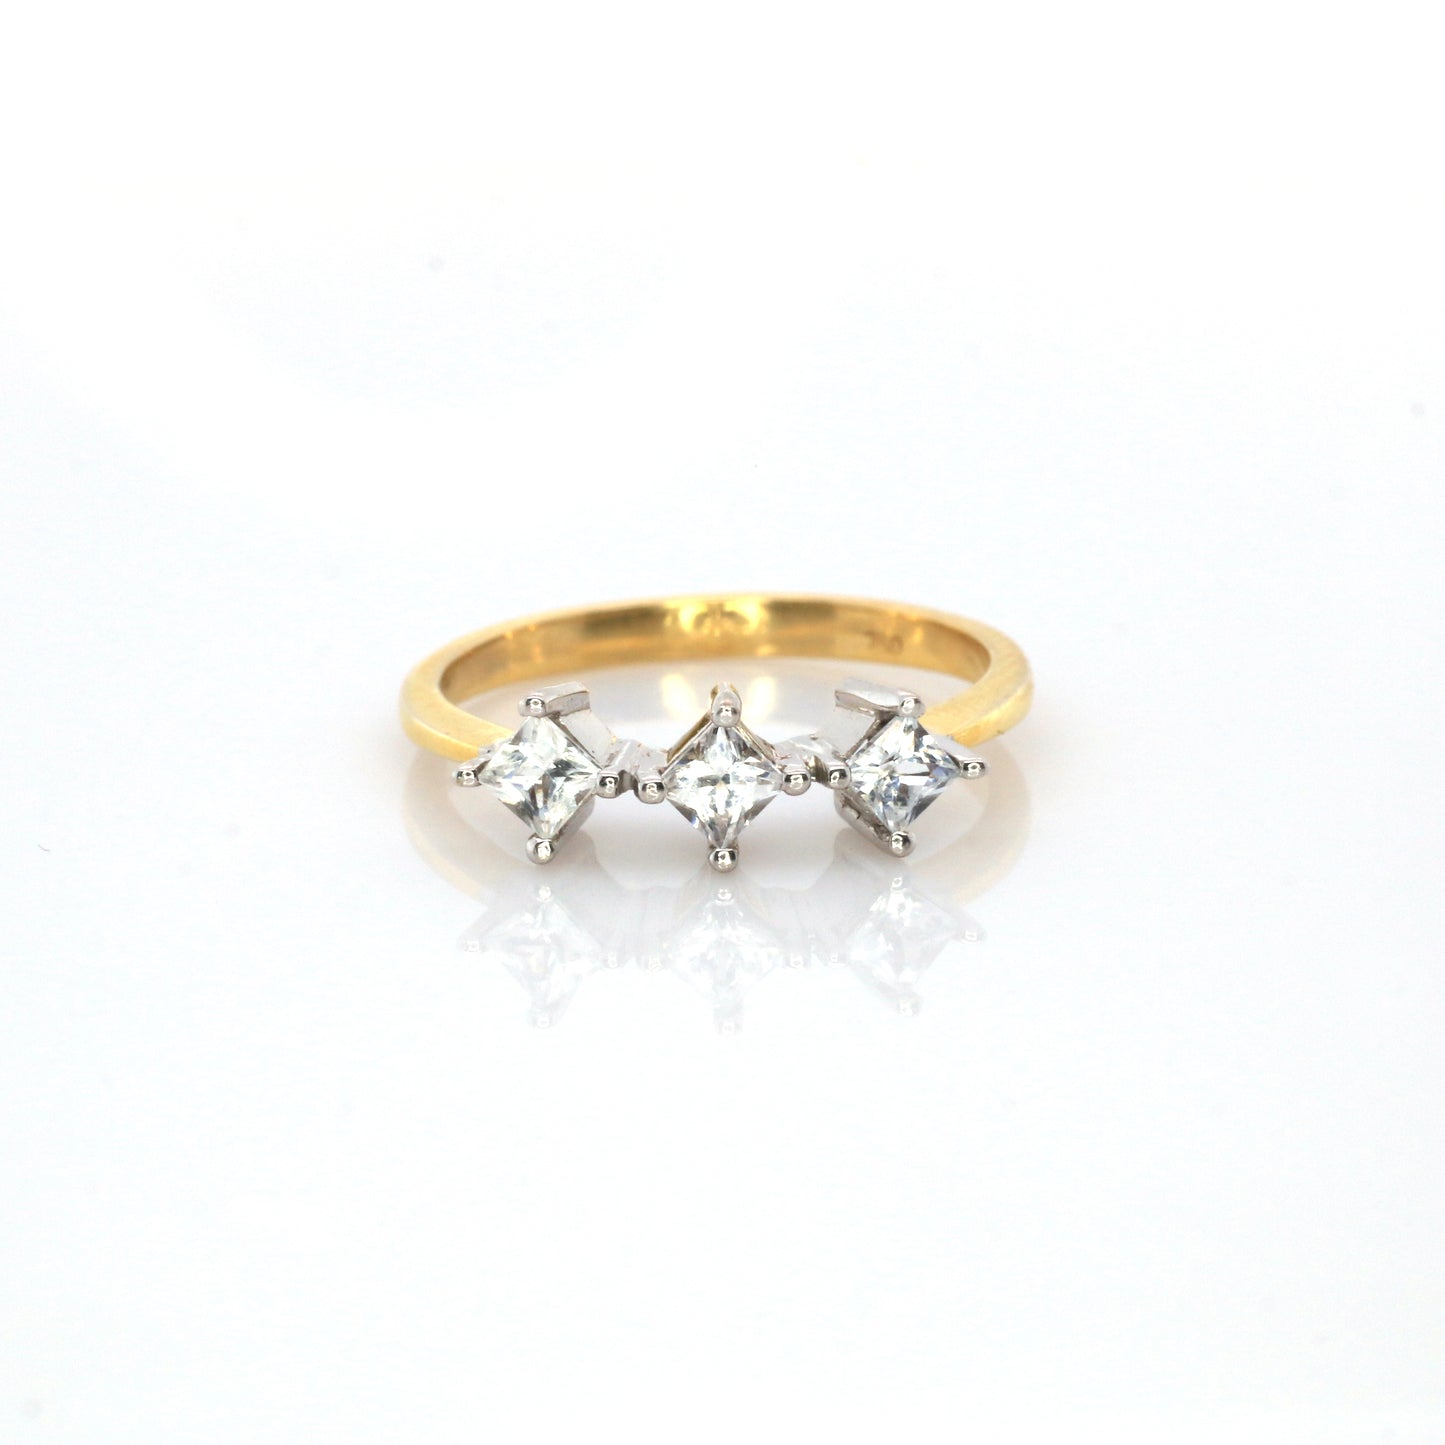 White Sapphire Yellow gold & white gold mixed Ring - 2.48 gm